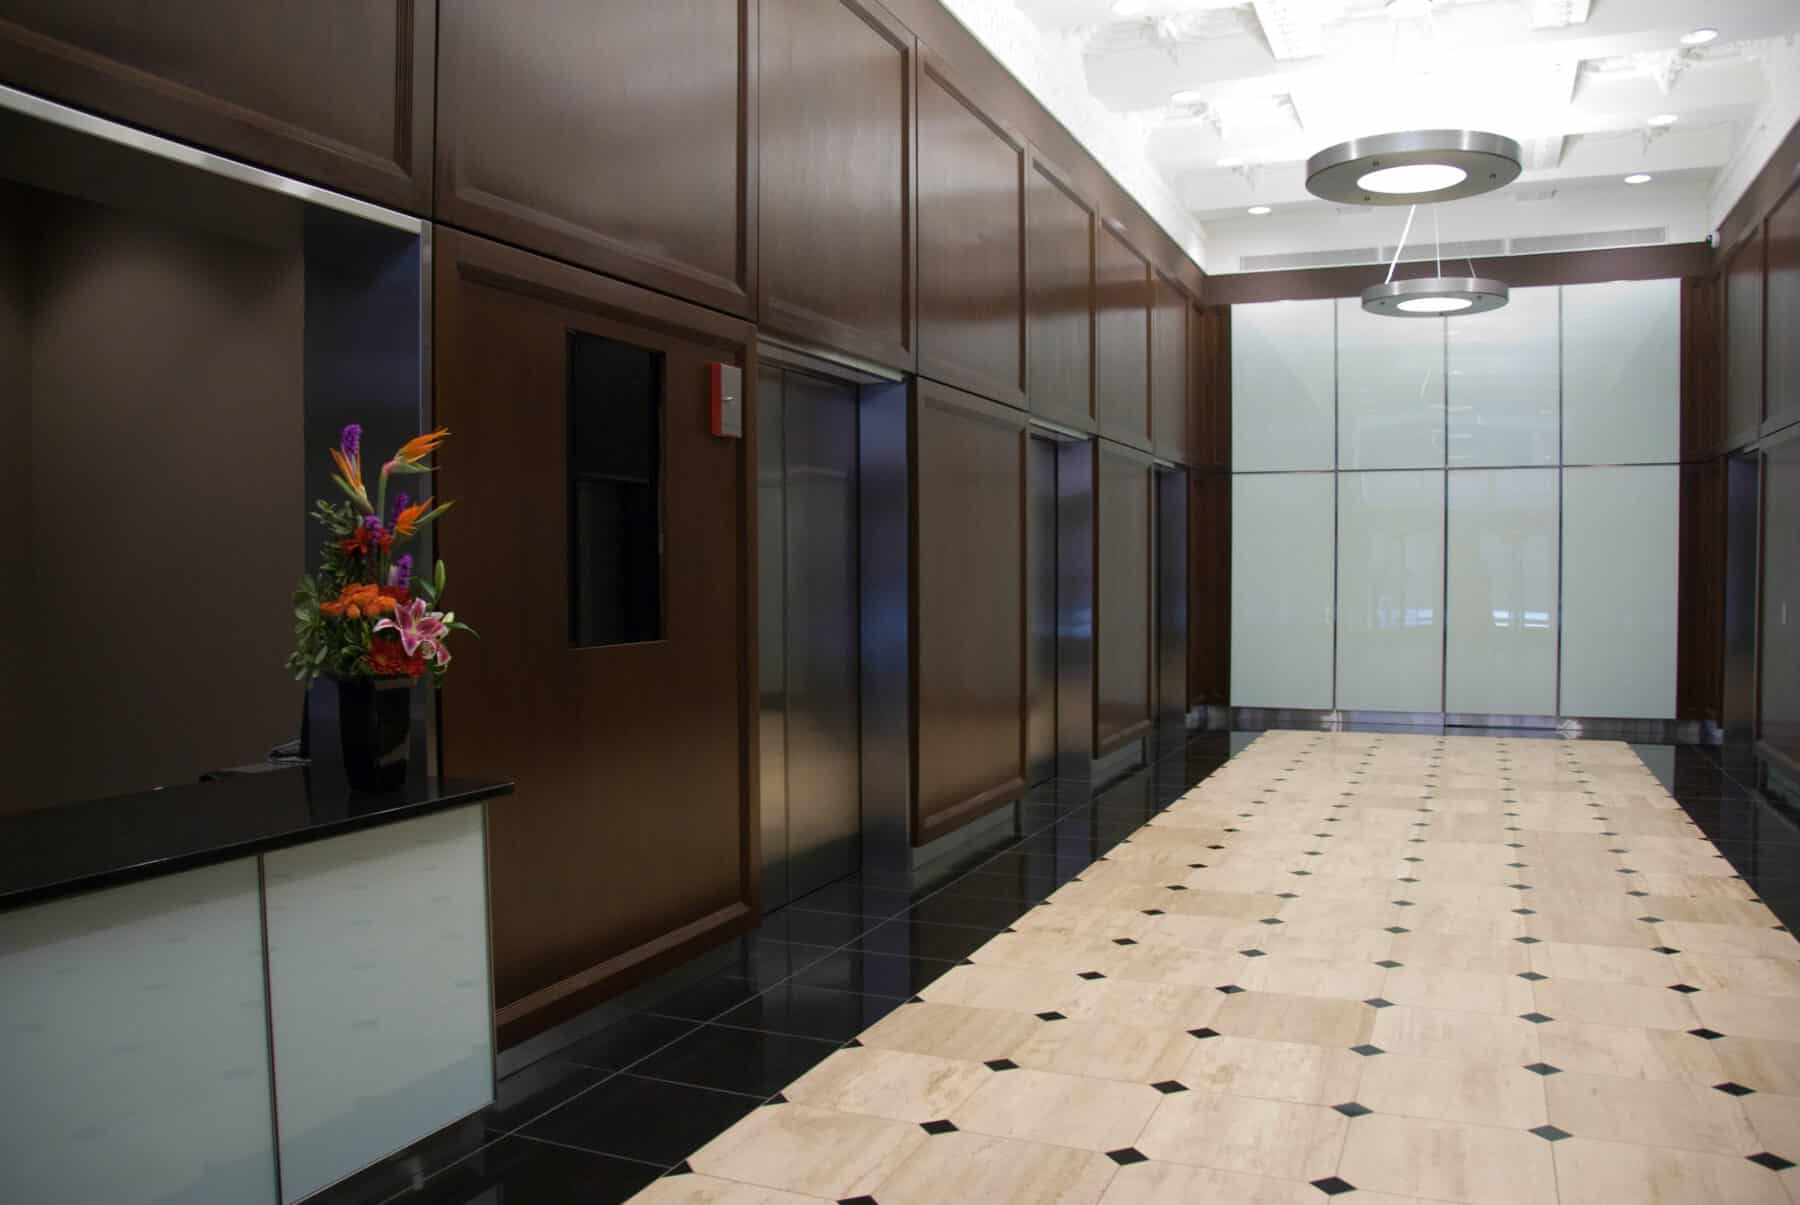 Custom Fabrication of Architectural Back Painted Glass Wall Panels for a Lobby from Construction Specialty Projects by Commercial Builder & General Contractor Structural Enterprises